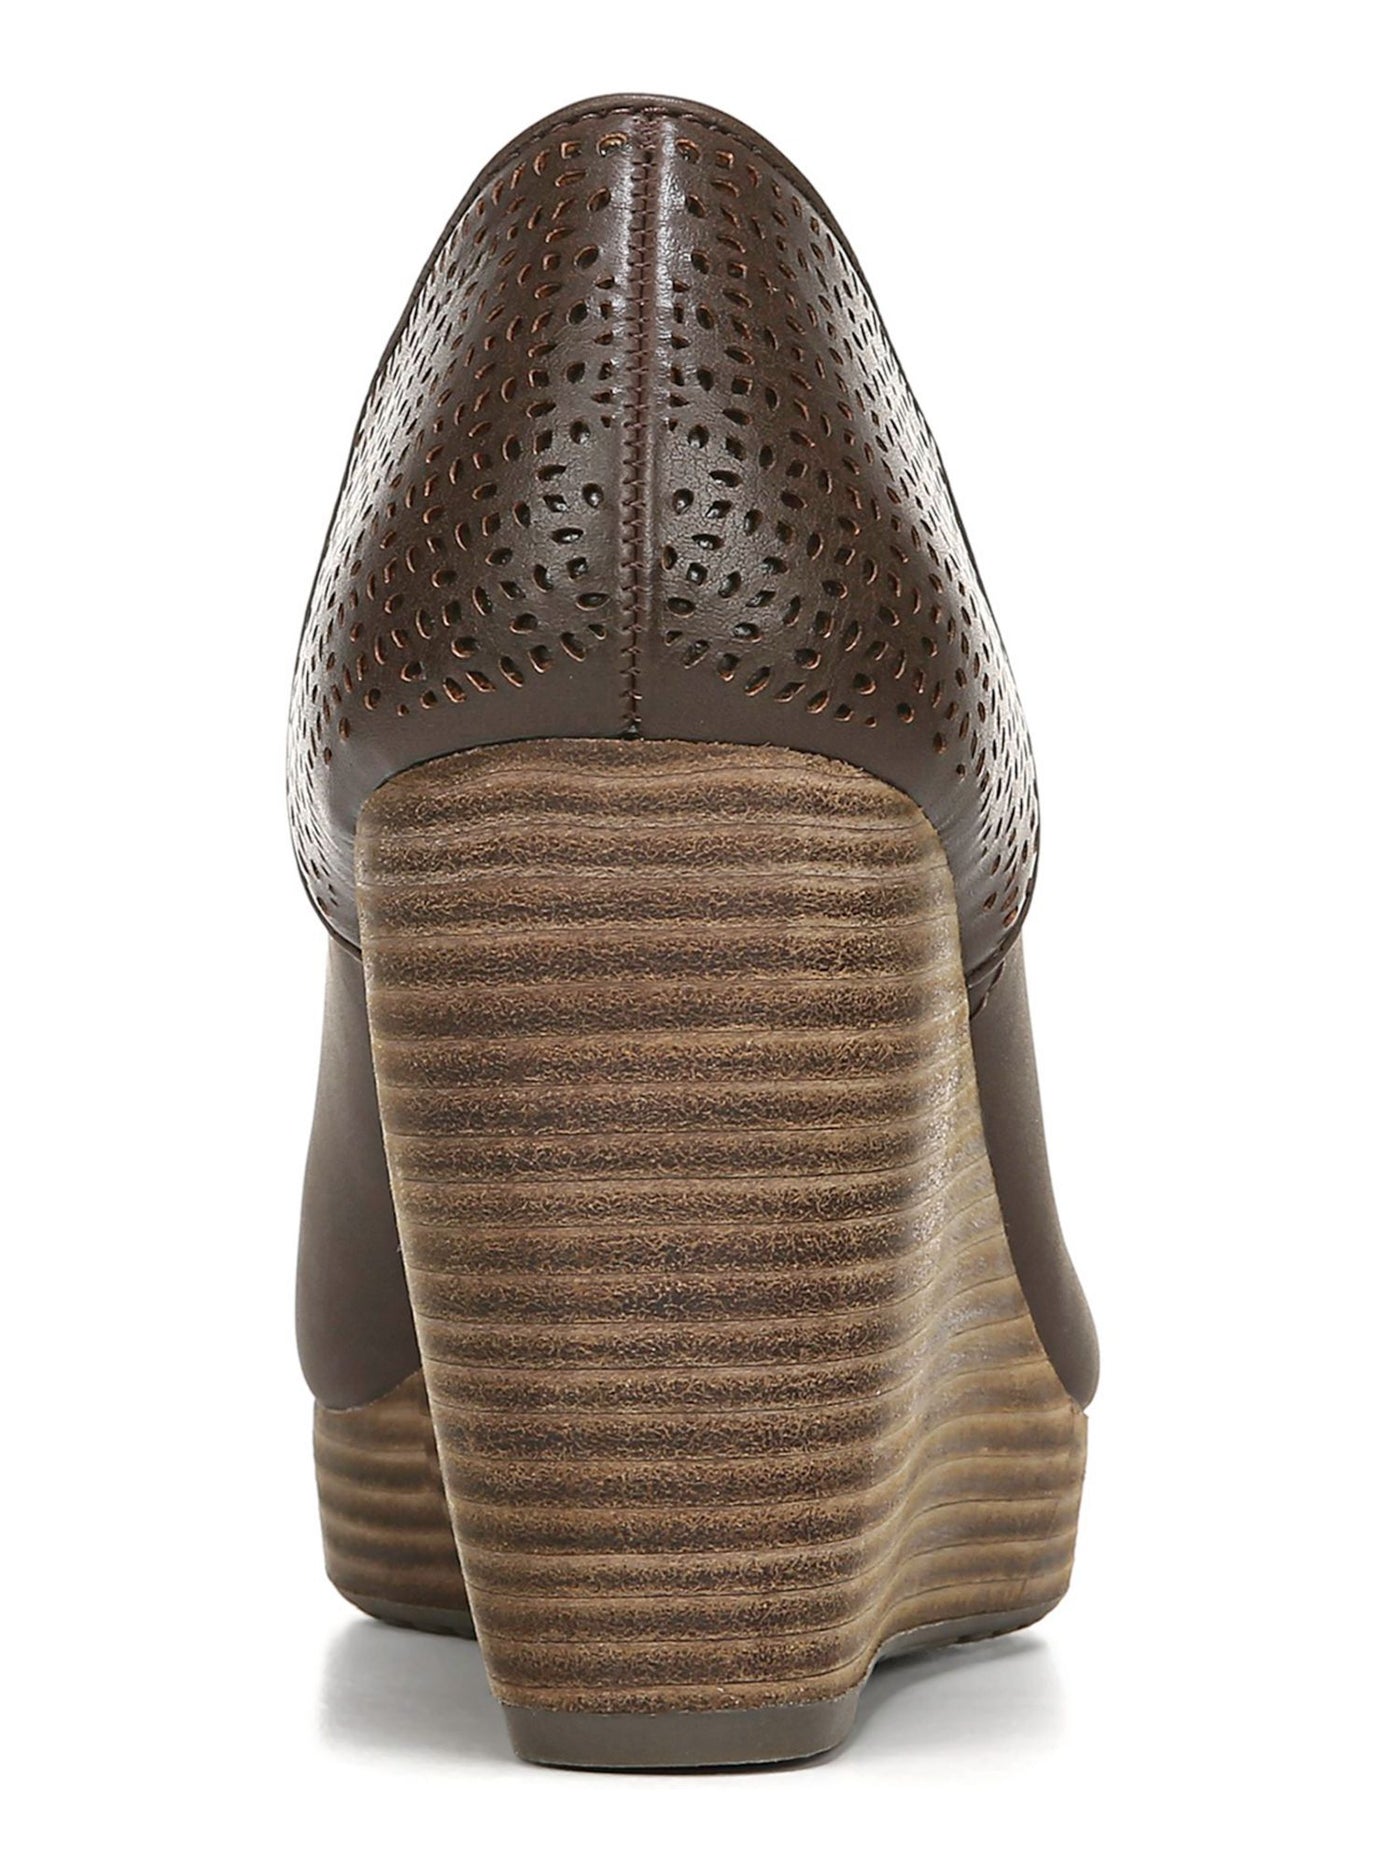 DR SCHOLLS Womens Taupe Brown 1/2" Platform Gored Perforated Comfort Harlow Almond Toe Wedge Slip On Shootie 6 W